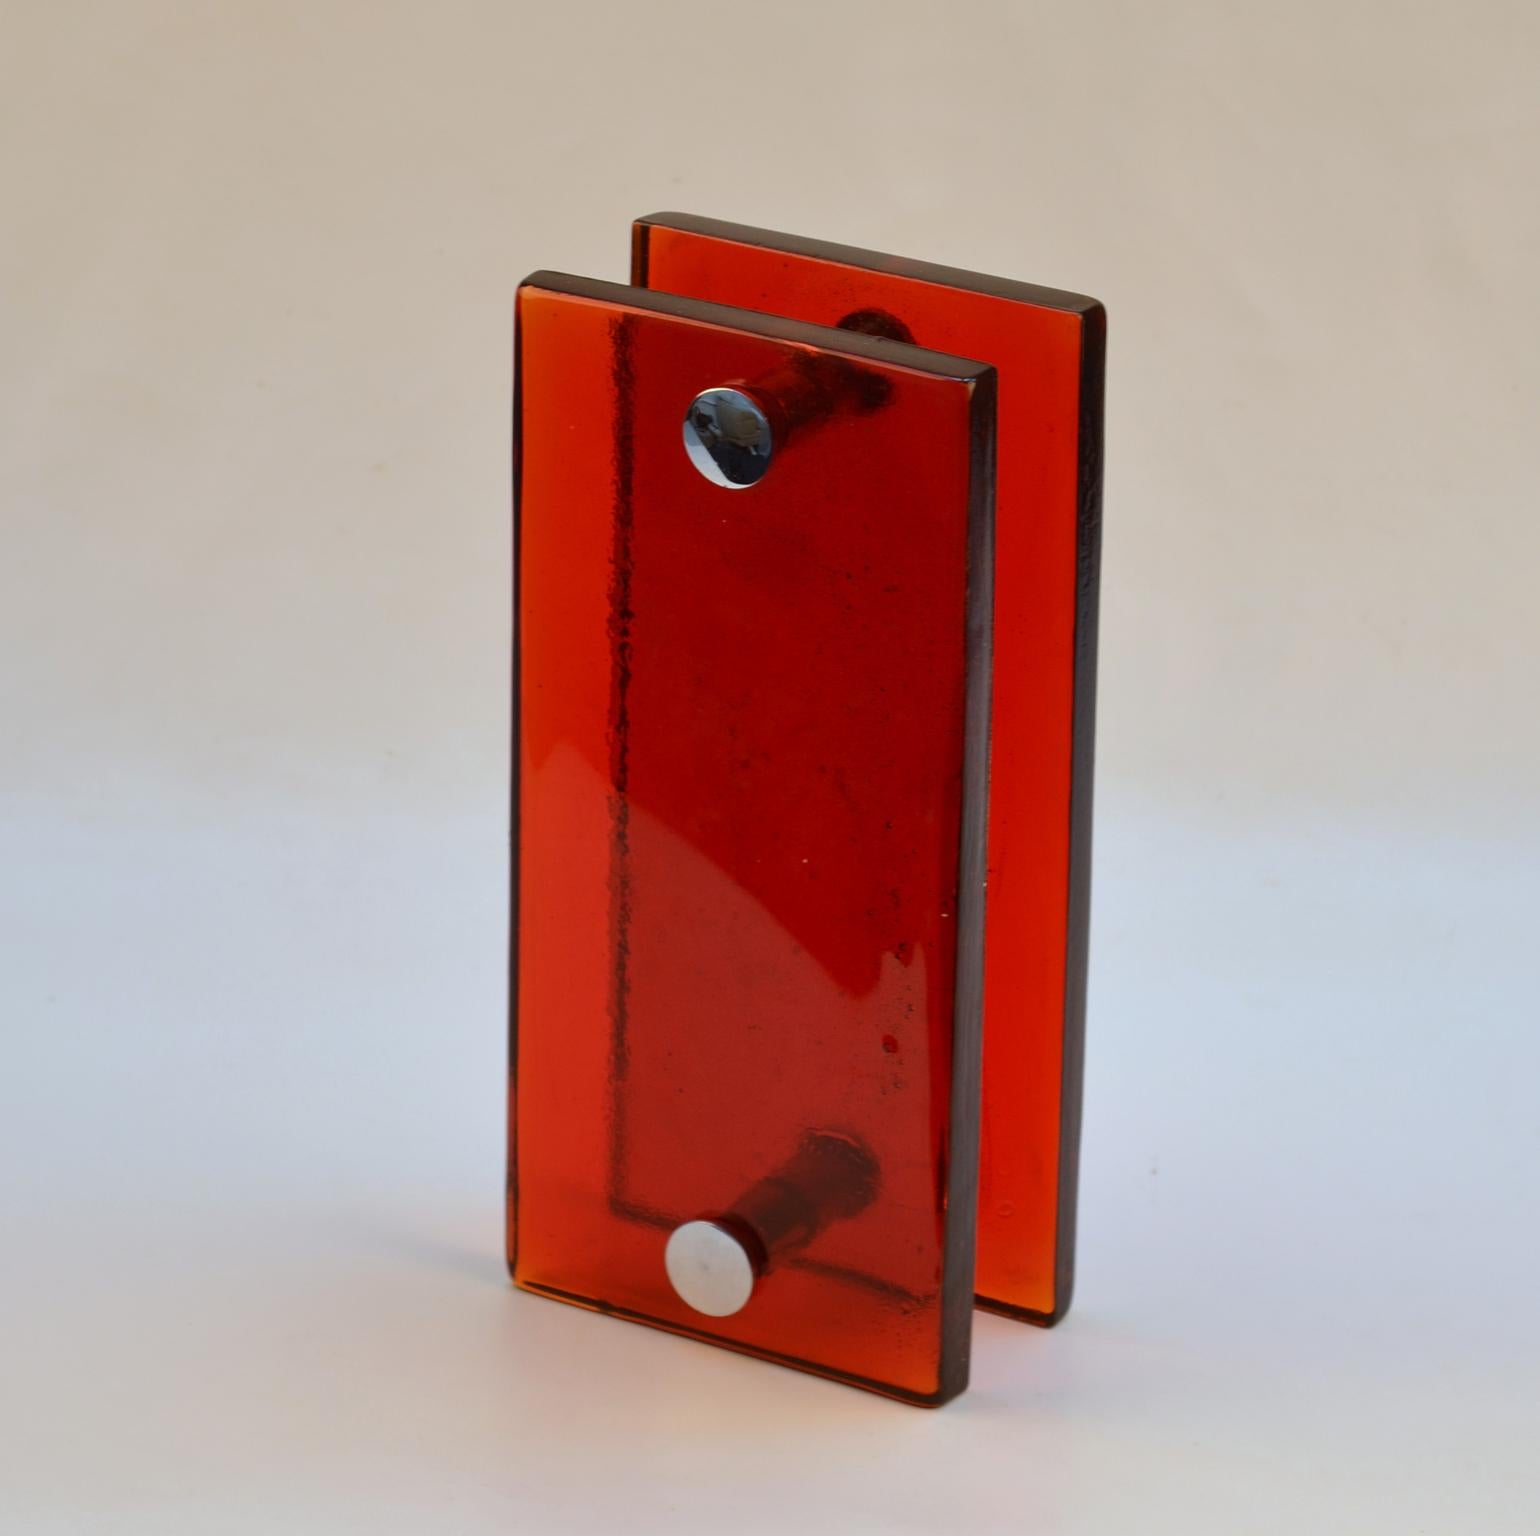 A pair of double door handles, push and pull, rectangular vibrant red cast glass with chrome fittings designed for a glass or wooden doors but suitable for any kind of doors. The glass slabs are cast by directing molten glass into a mould where it